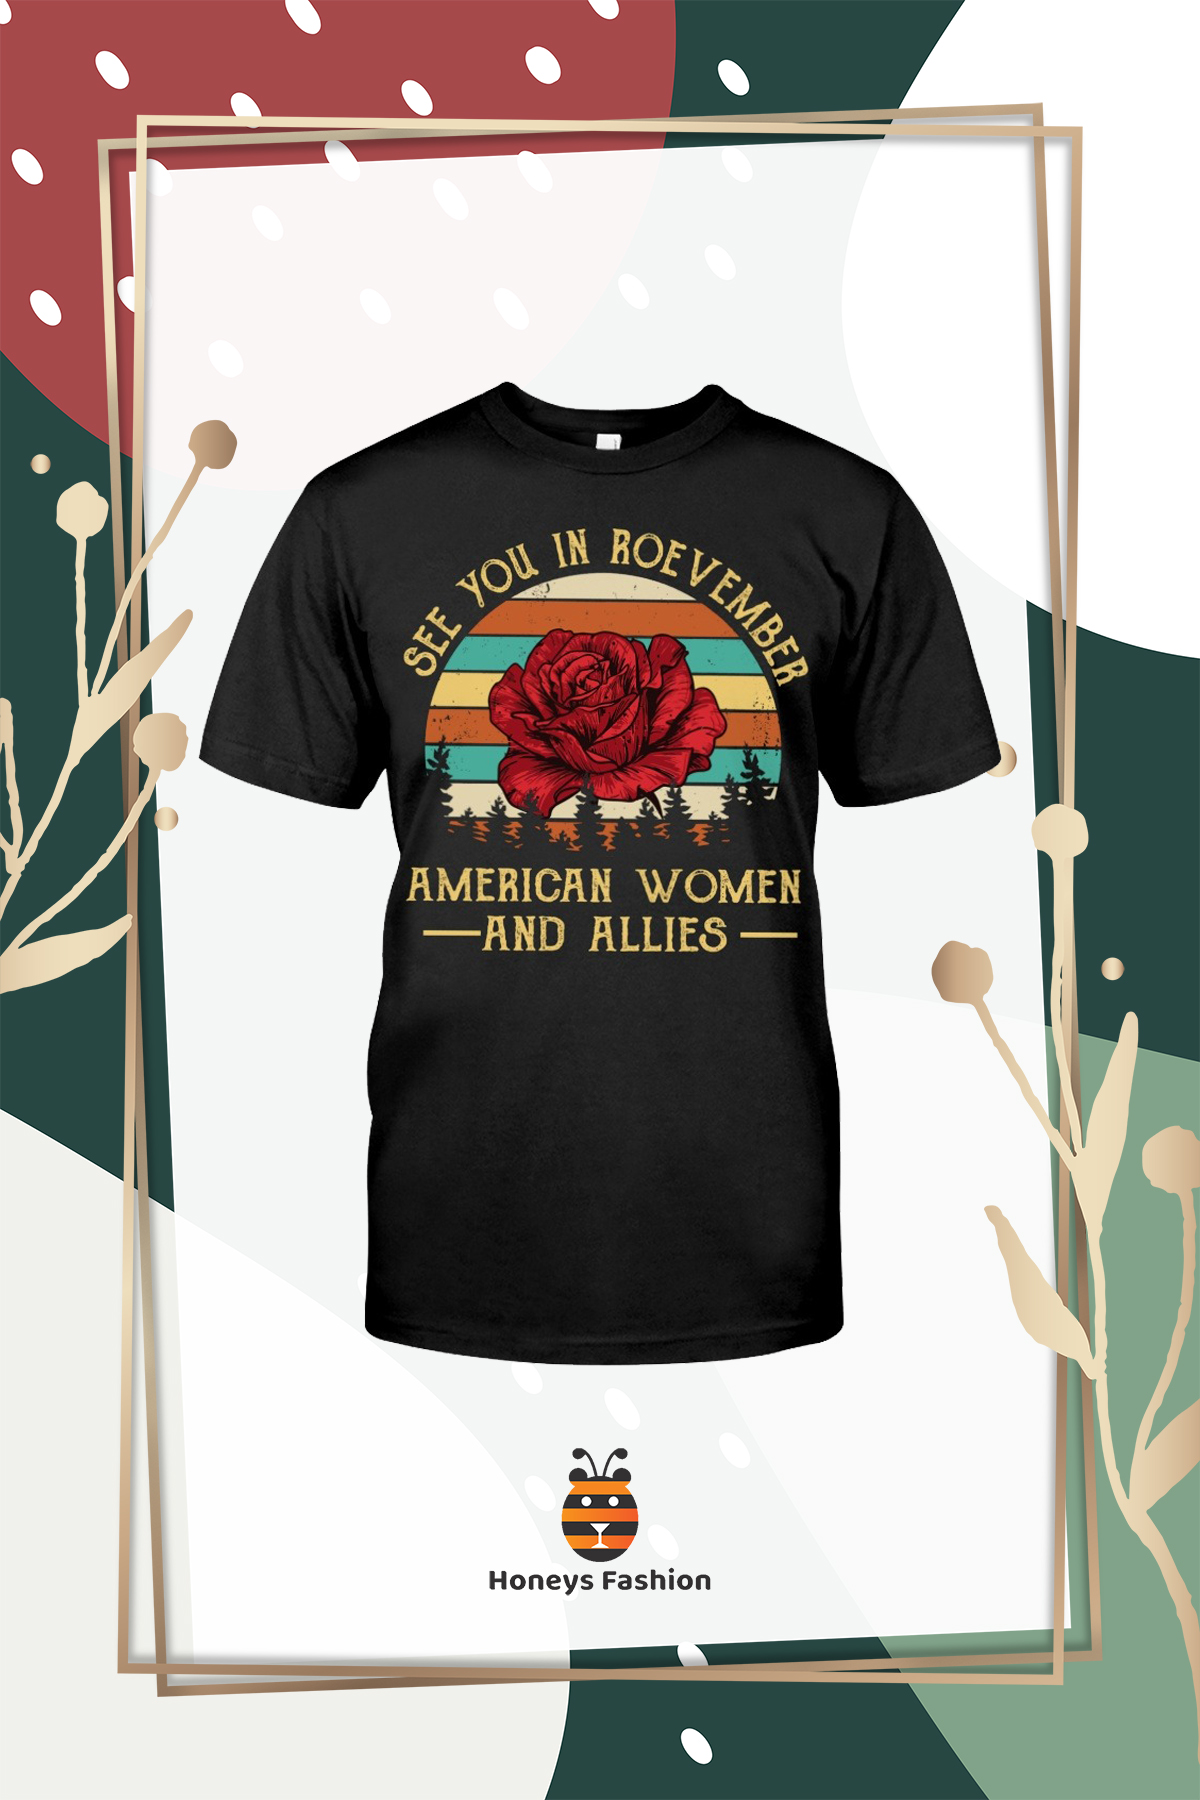 See You In Roevember American Women And Allies Shirt Hoodie